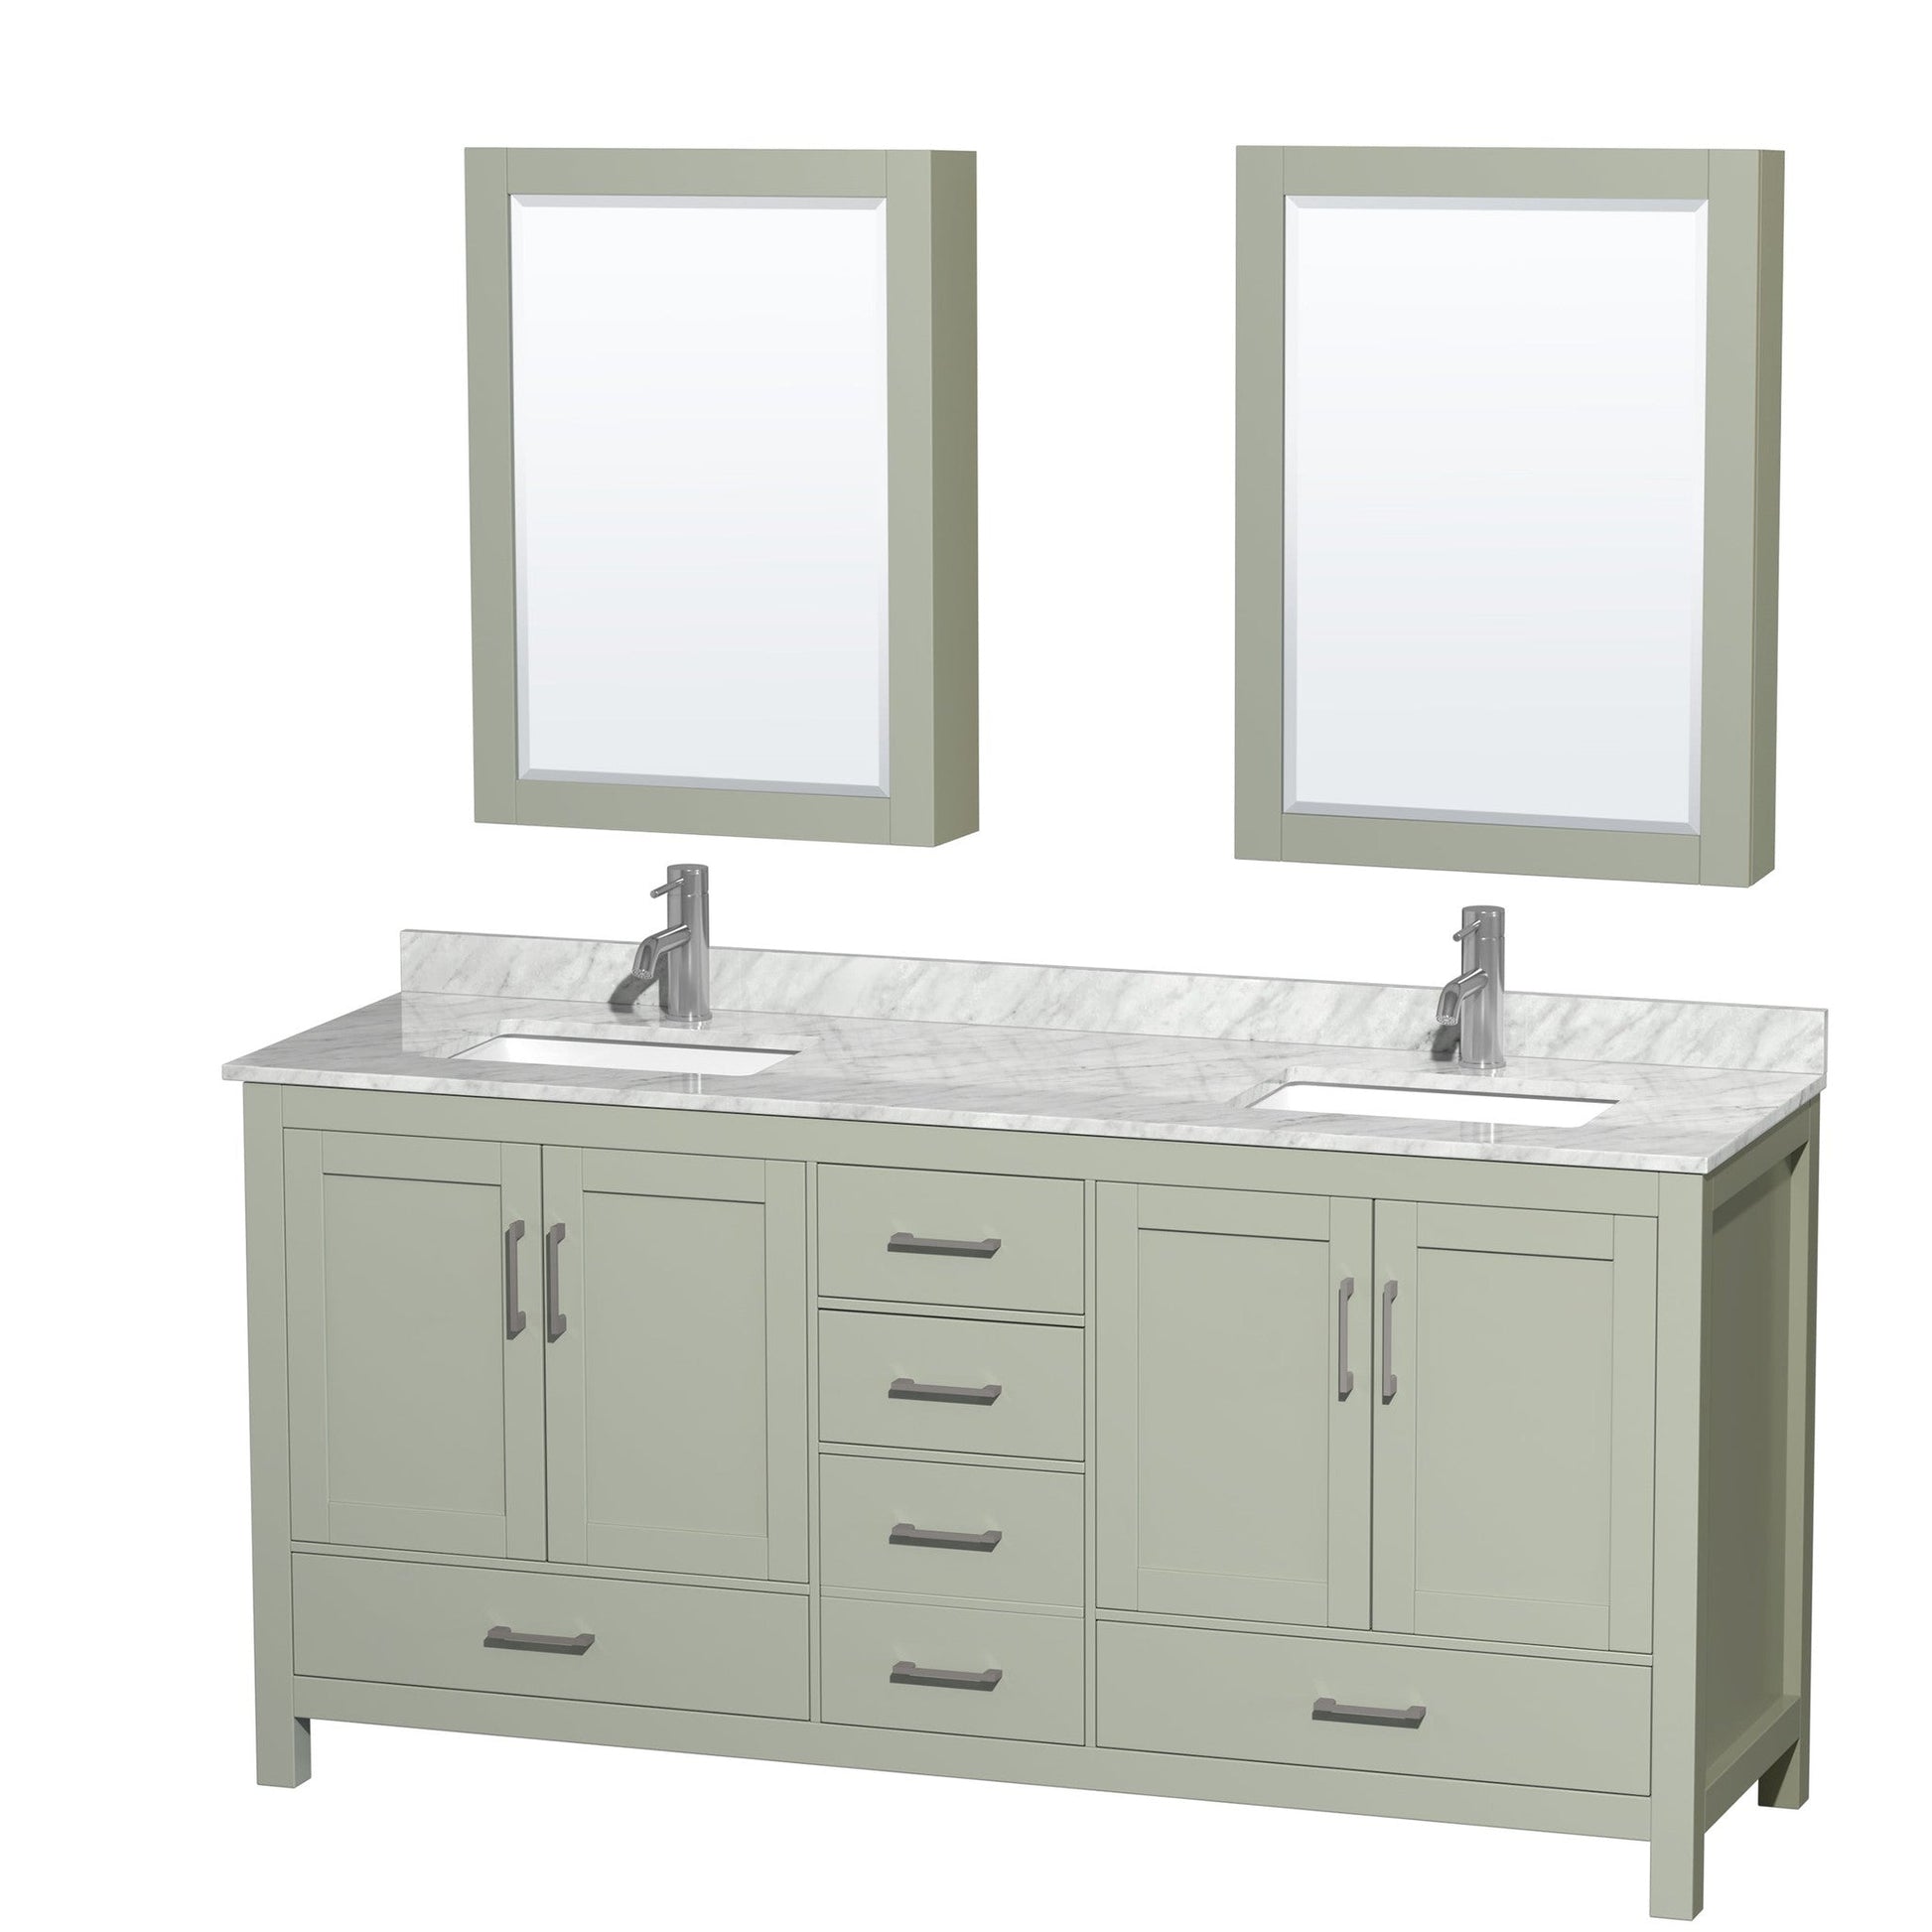 Sheffield 72" Double Bathroom Vanity in Light Green, White Carrara Marble Countertop, Undermount Square Sinks, Brushed Nickel Trim, Medicine Cabinets